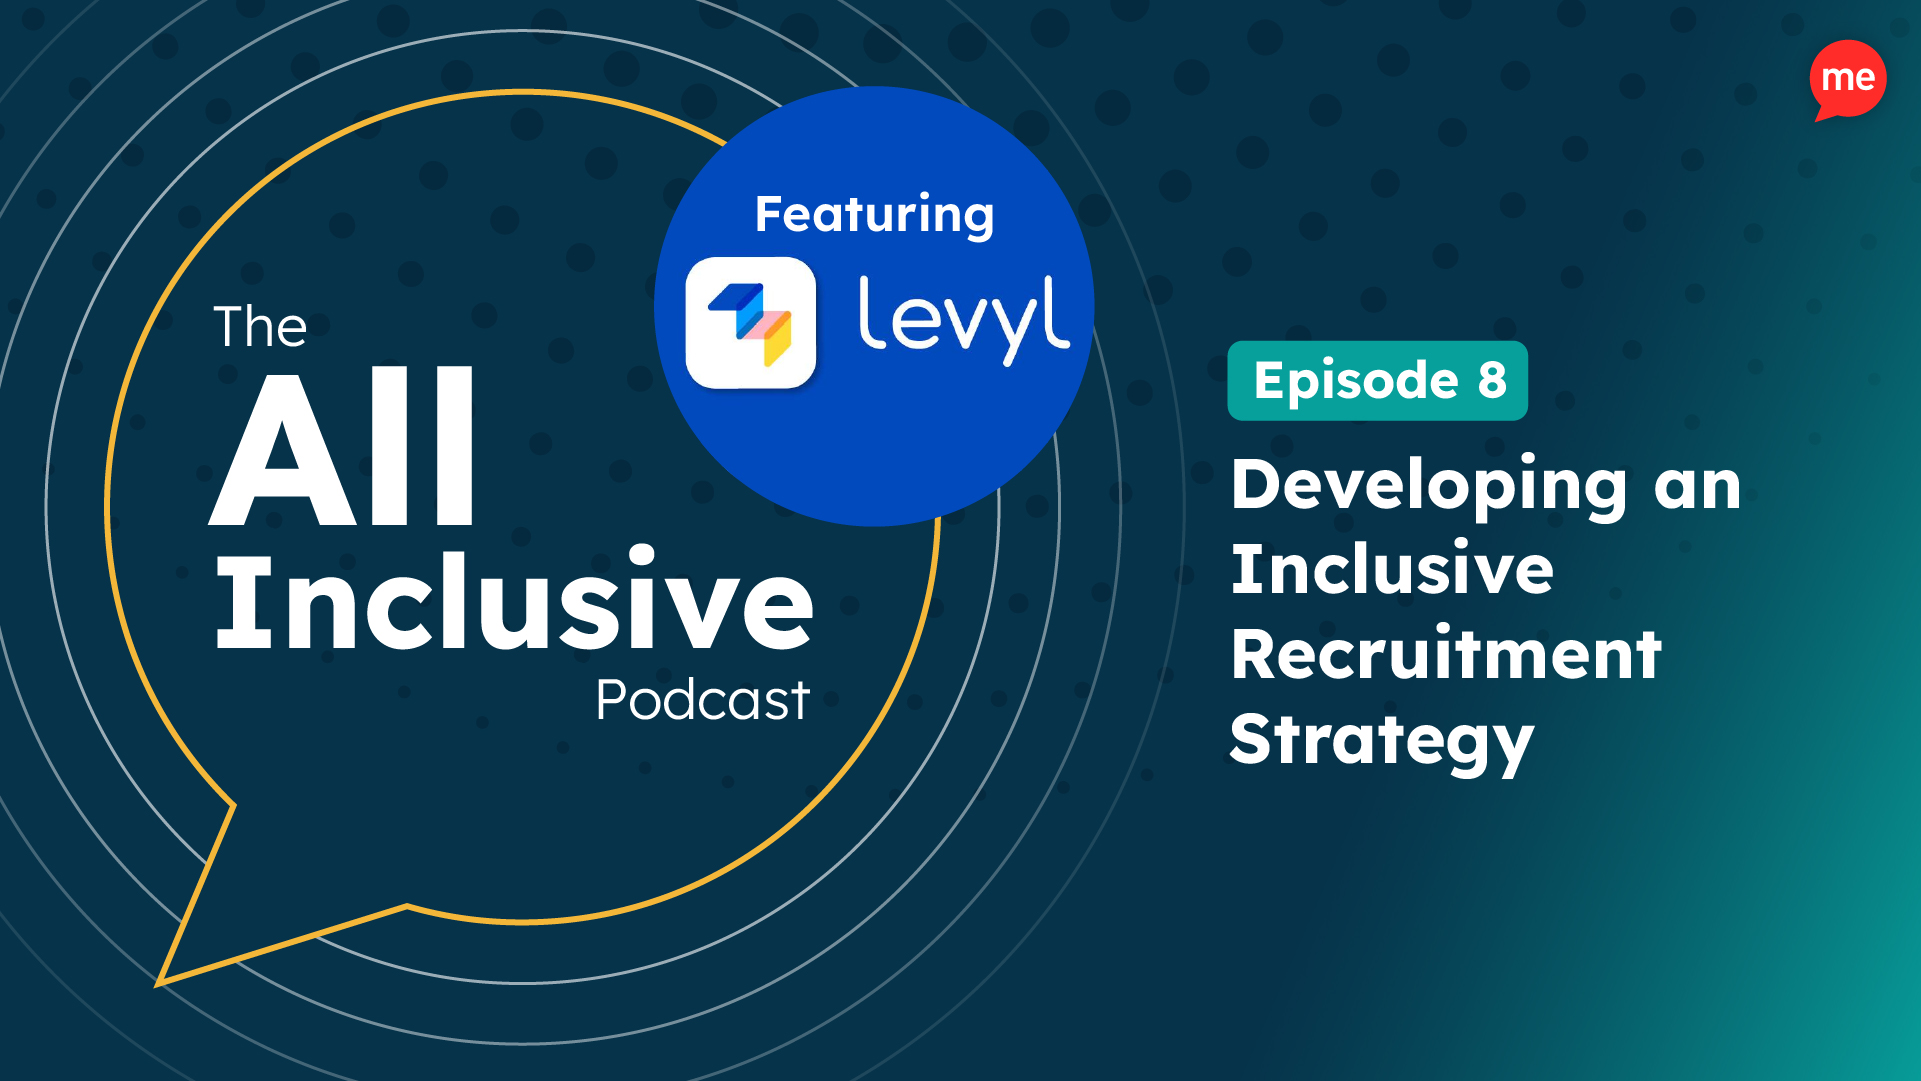 The All Inclusive Podcast, Episode 8, Developing an Inclusive Recruitment Strategy